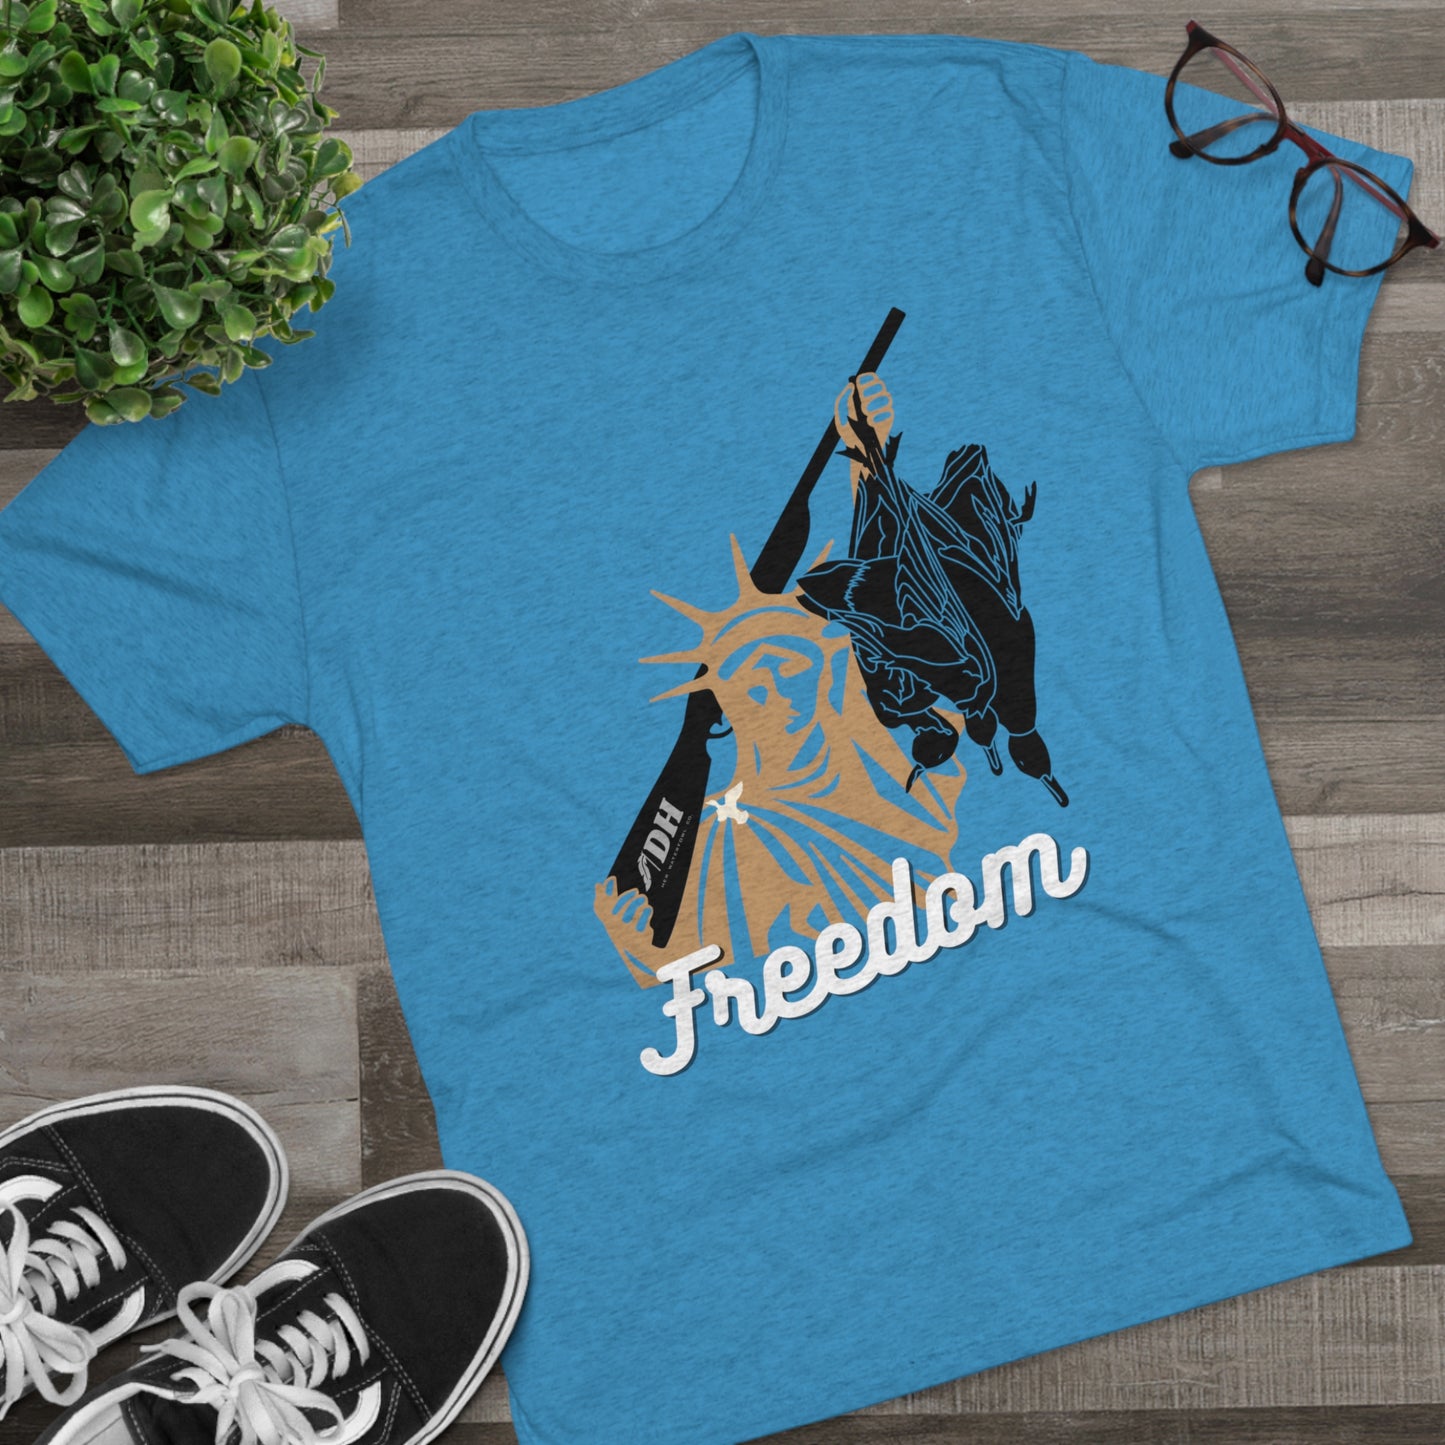 DH FREEDOM Tee Version 1 (Multiple Color Options)